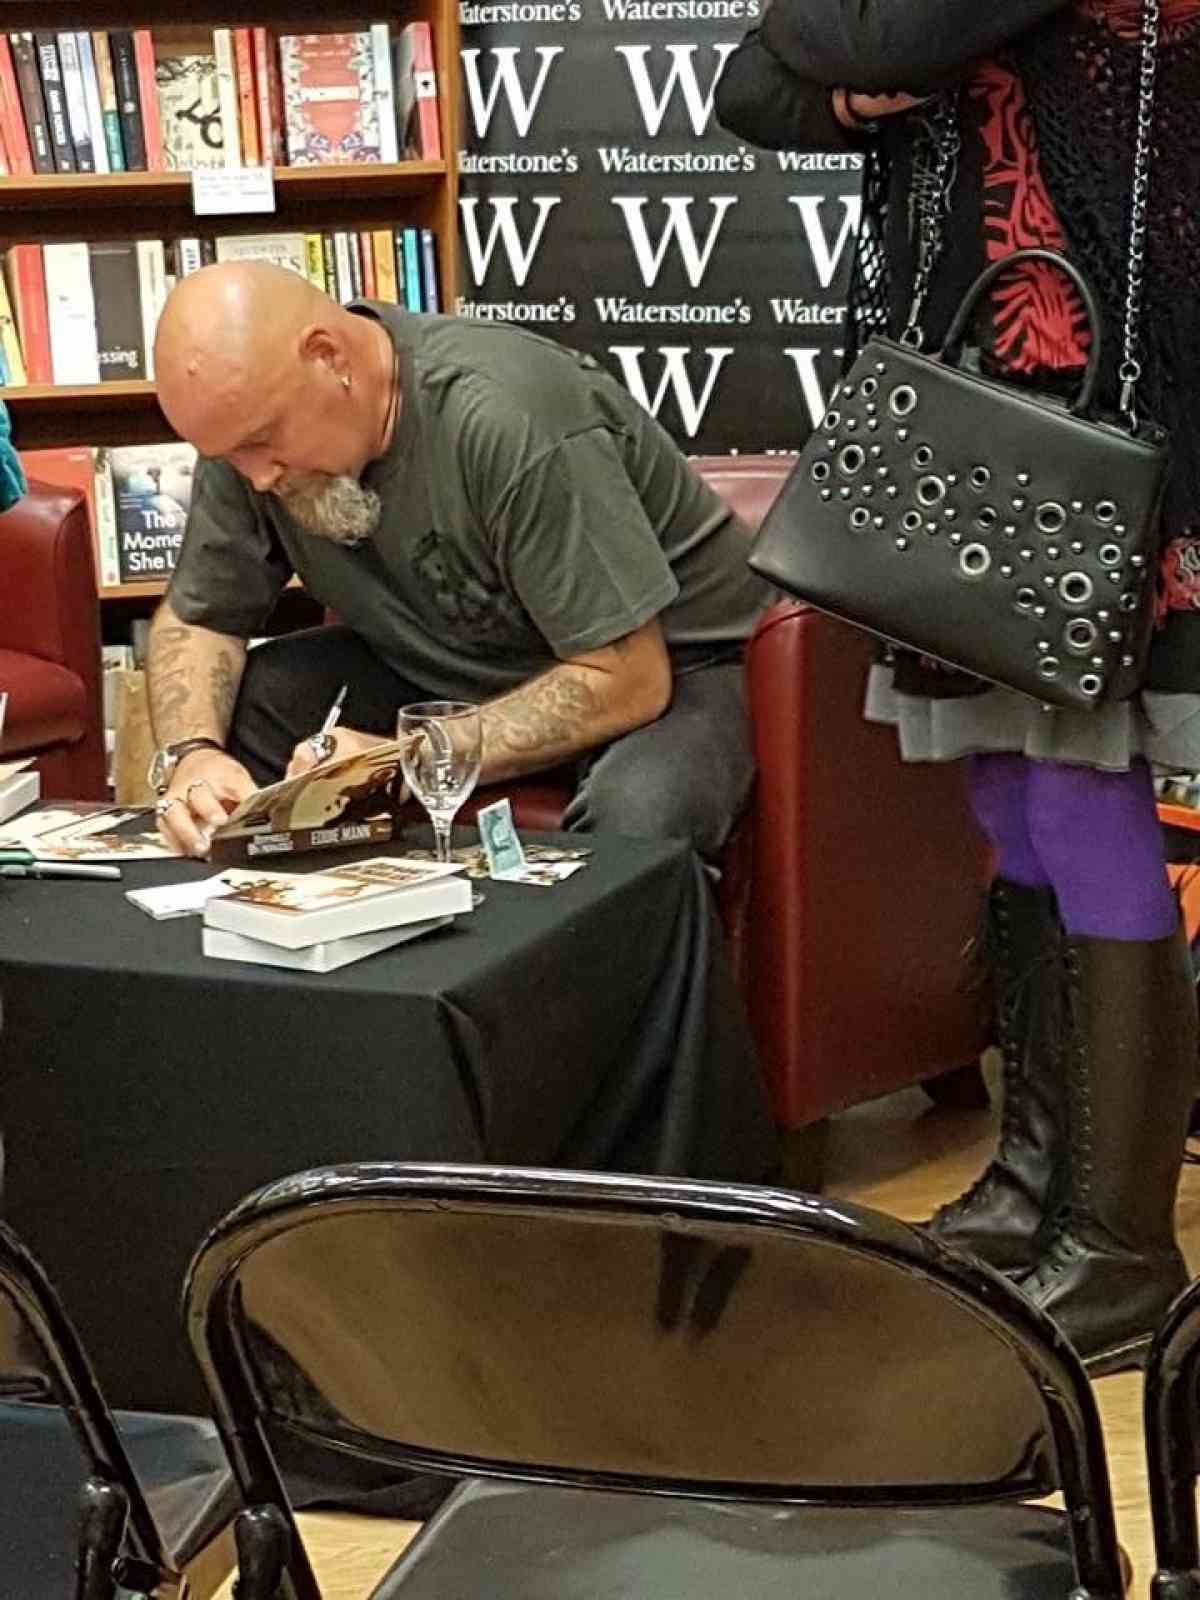 Signing his book after the book reading